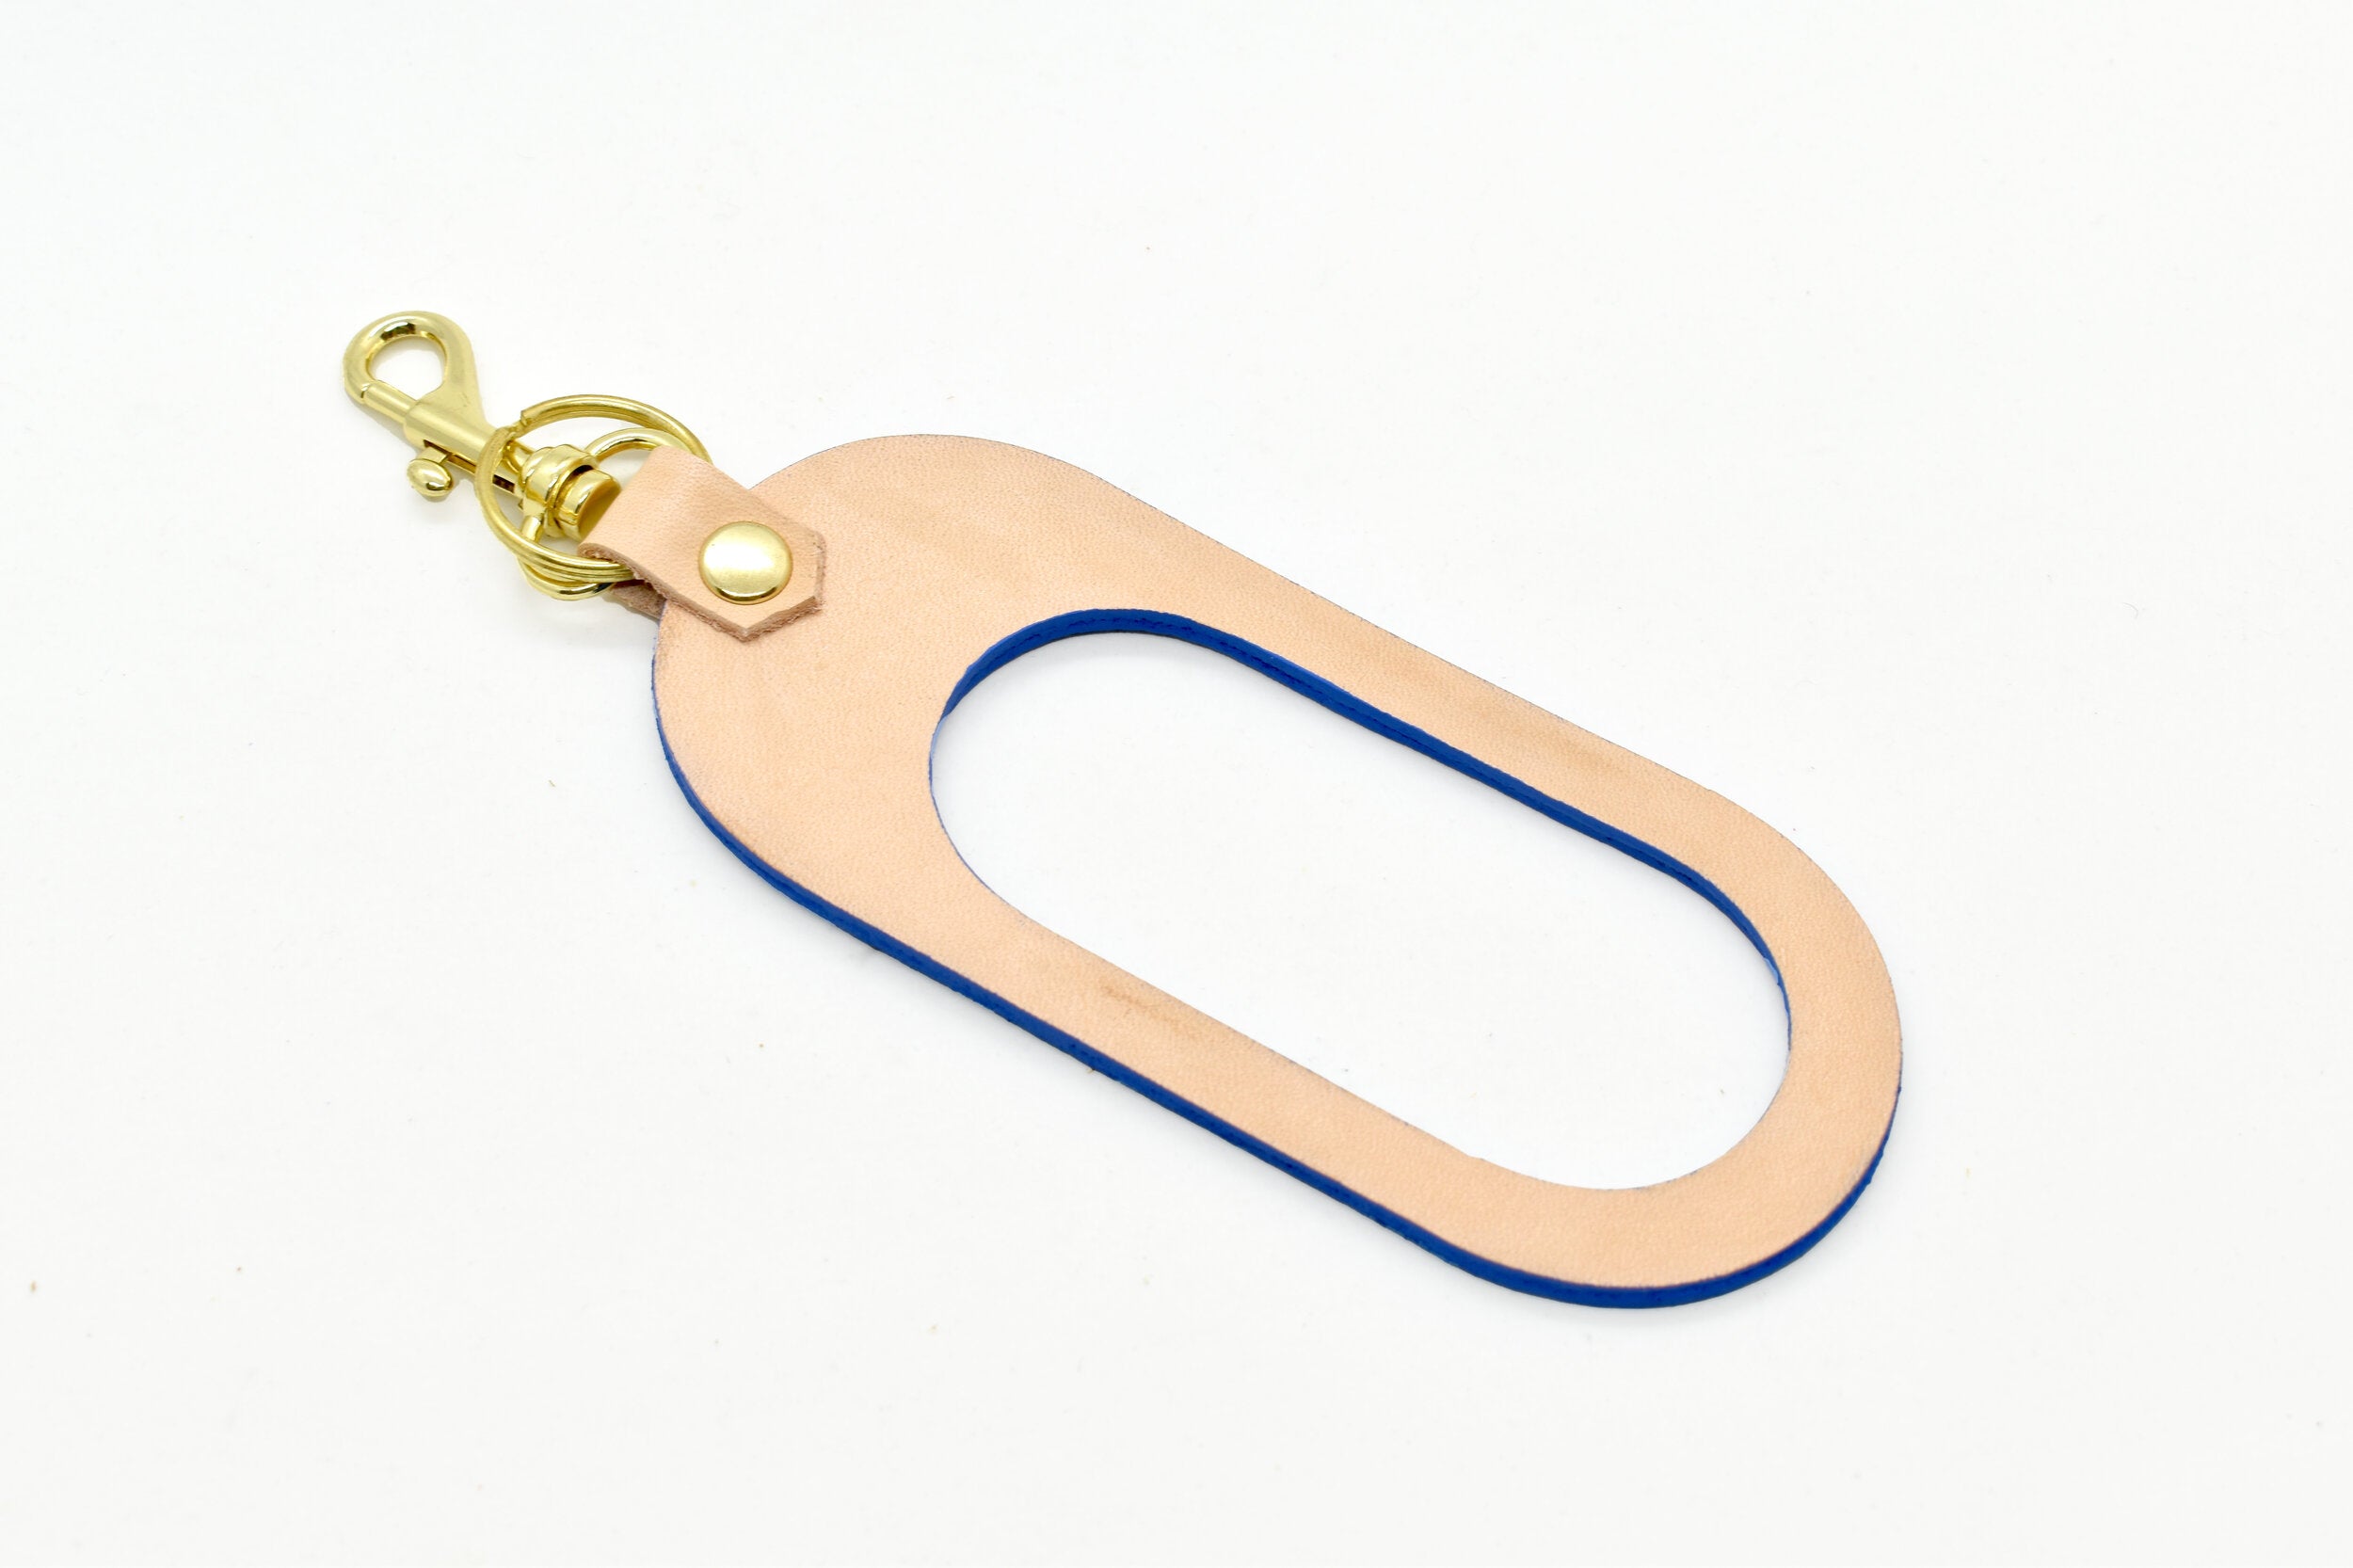 a modern leather keychain with cutout finished with a gold key ring and clasp in vegetable tanned and matisse blue leathers